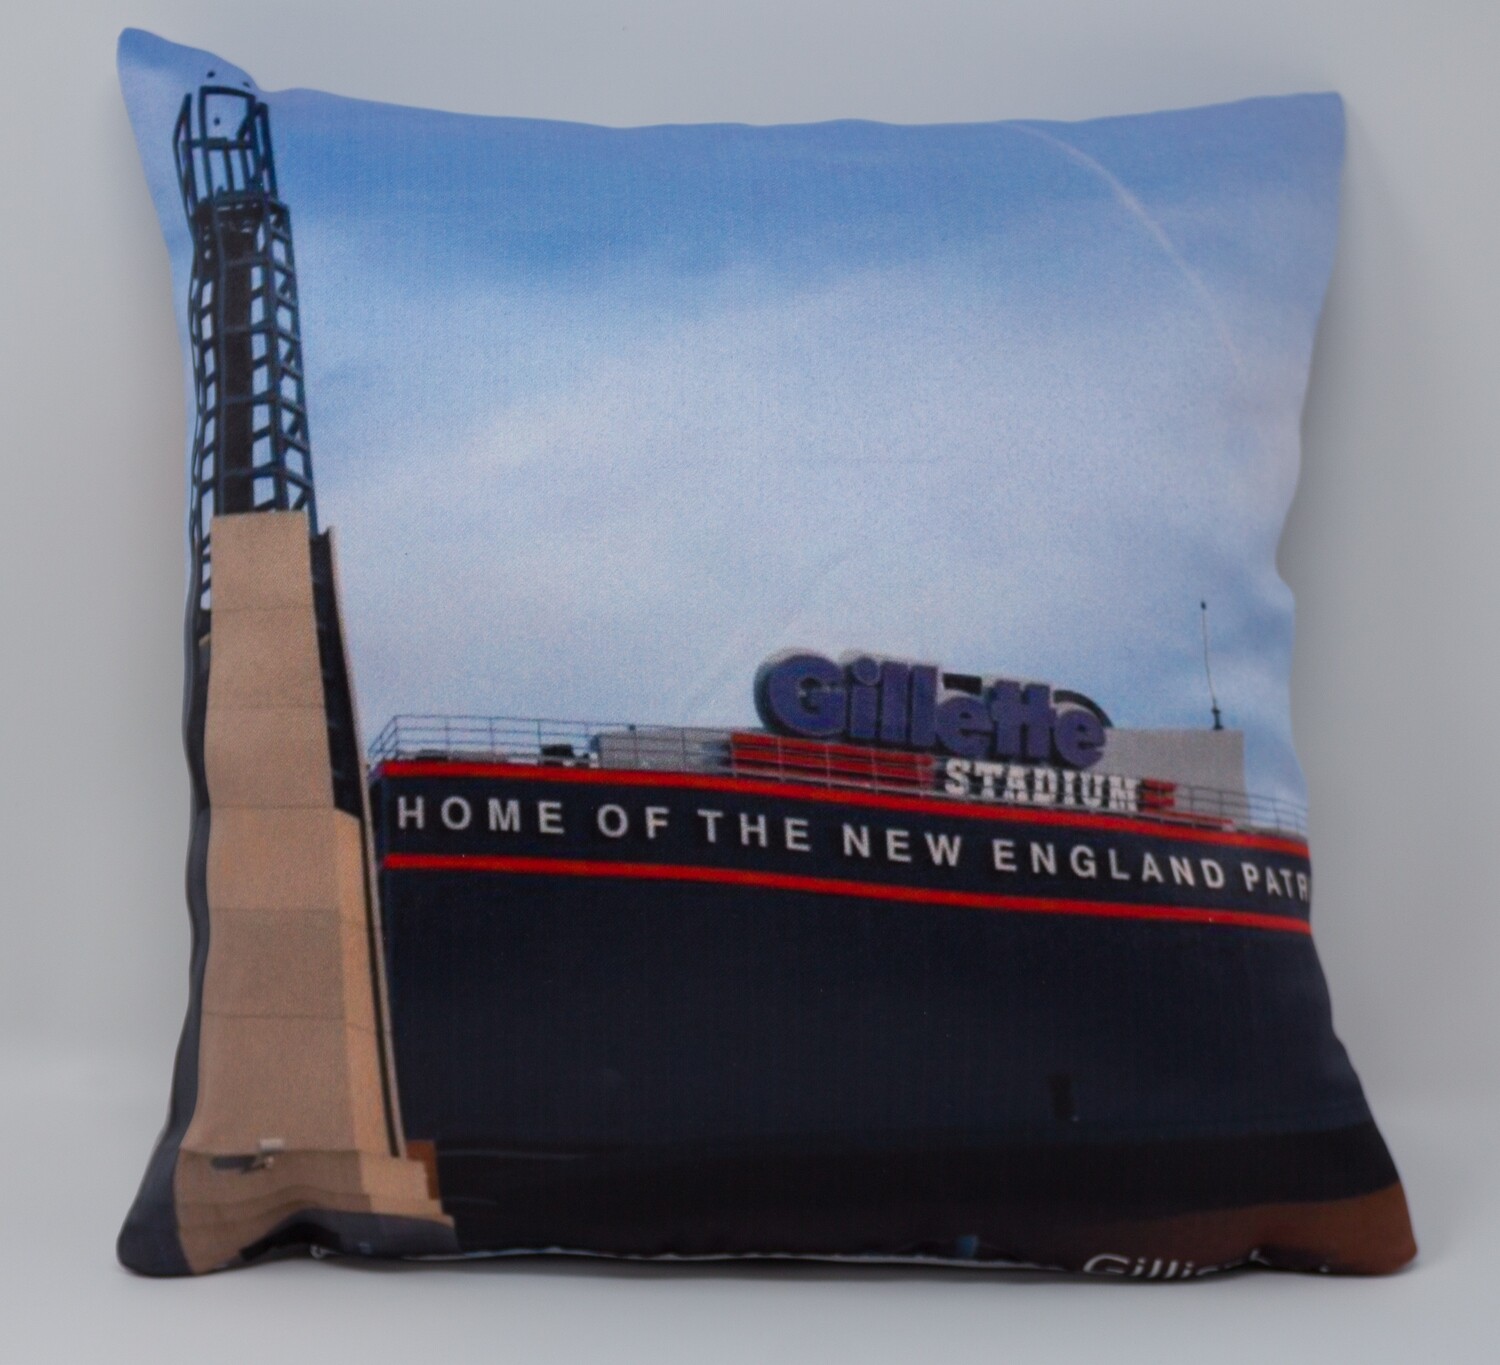 Foxboro Gallery-12"x12" Double Sided Photo Image Pillow- New England Patriots